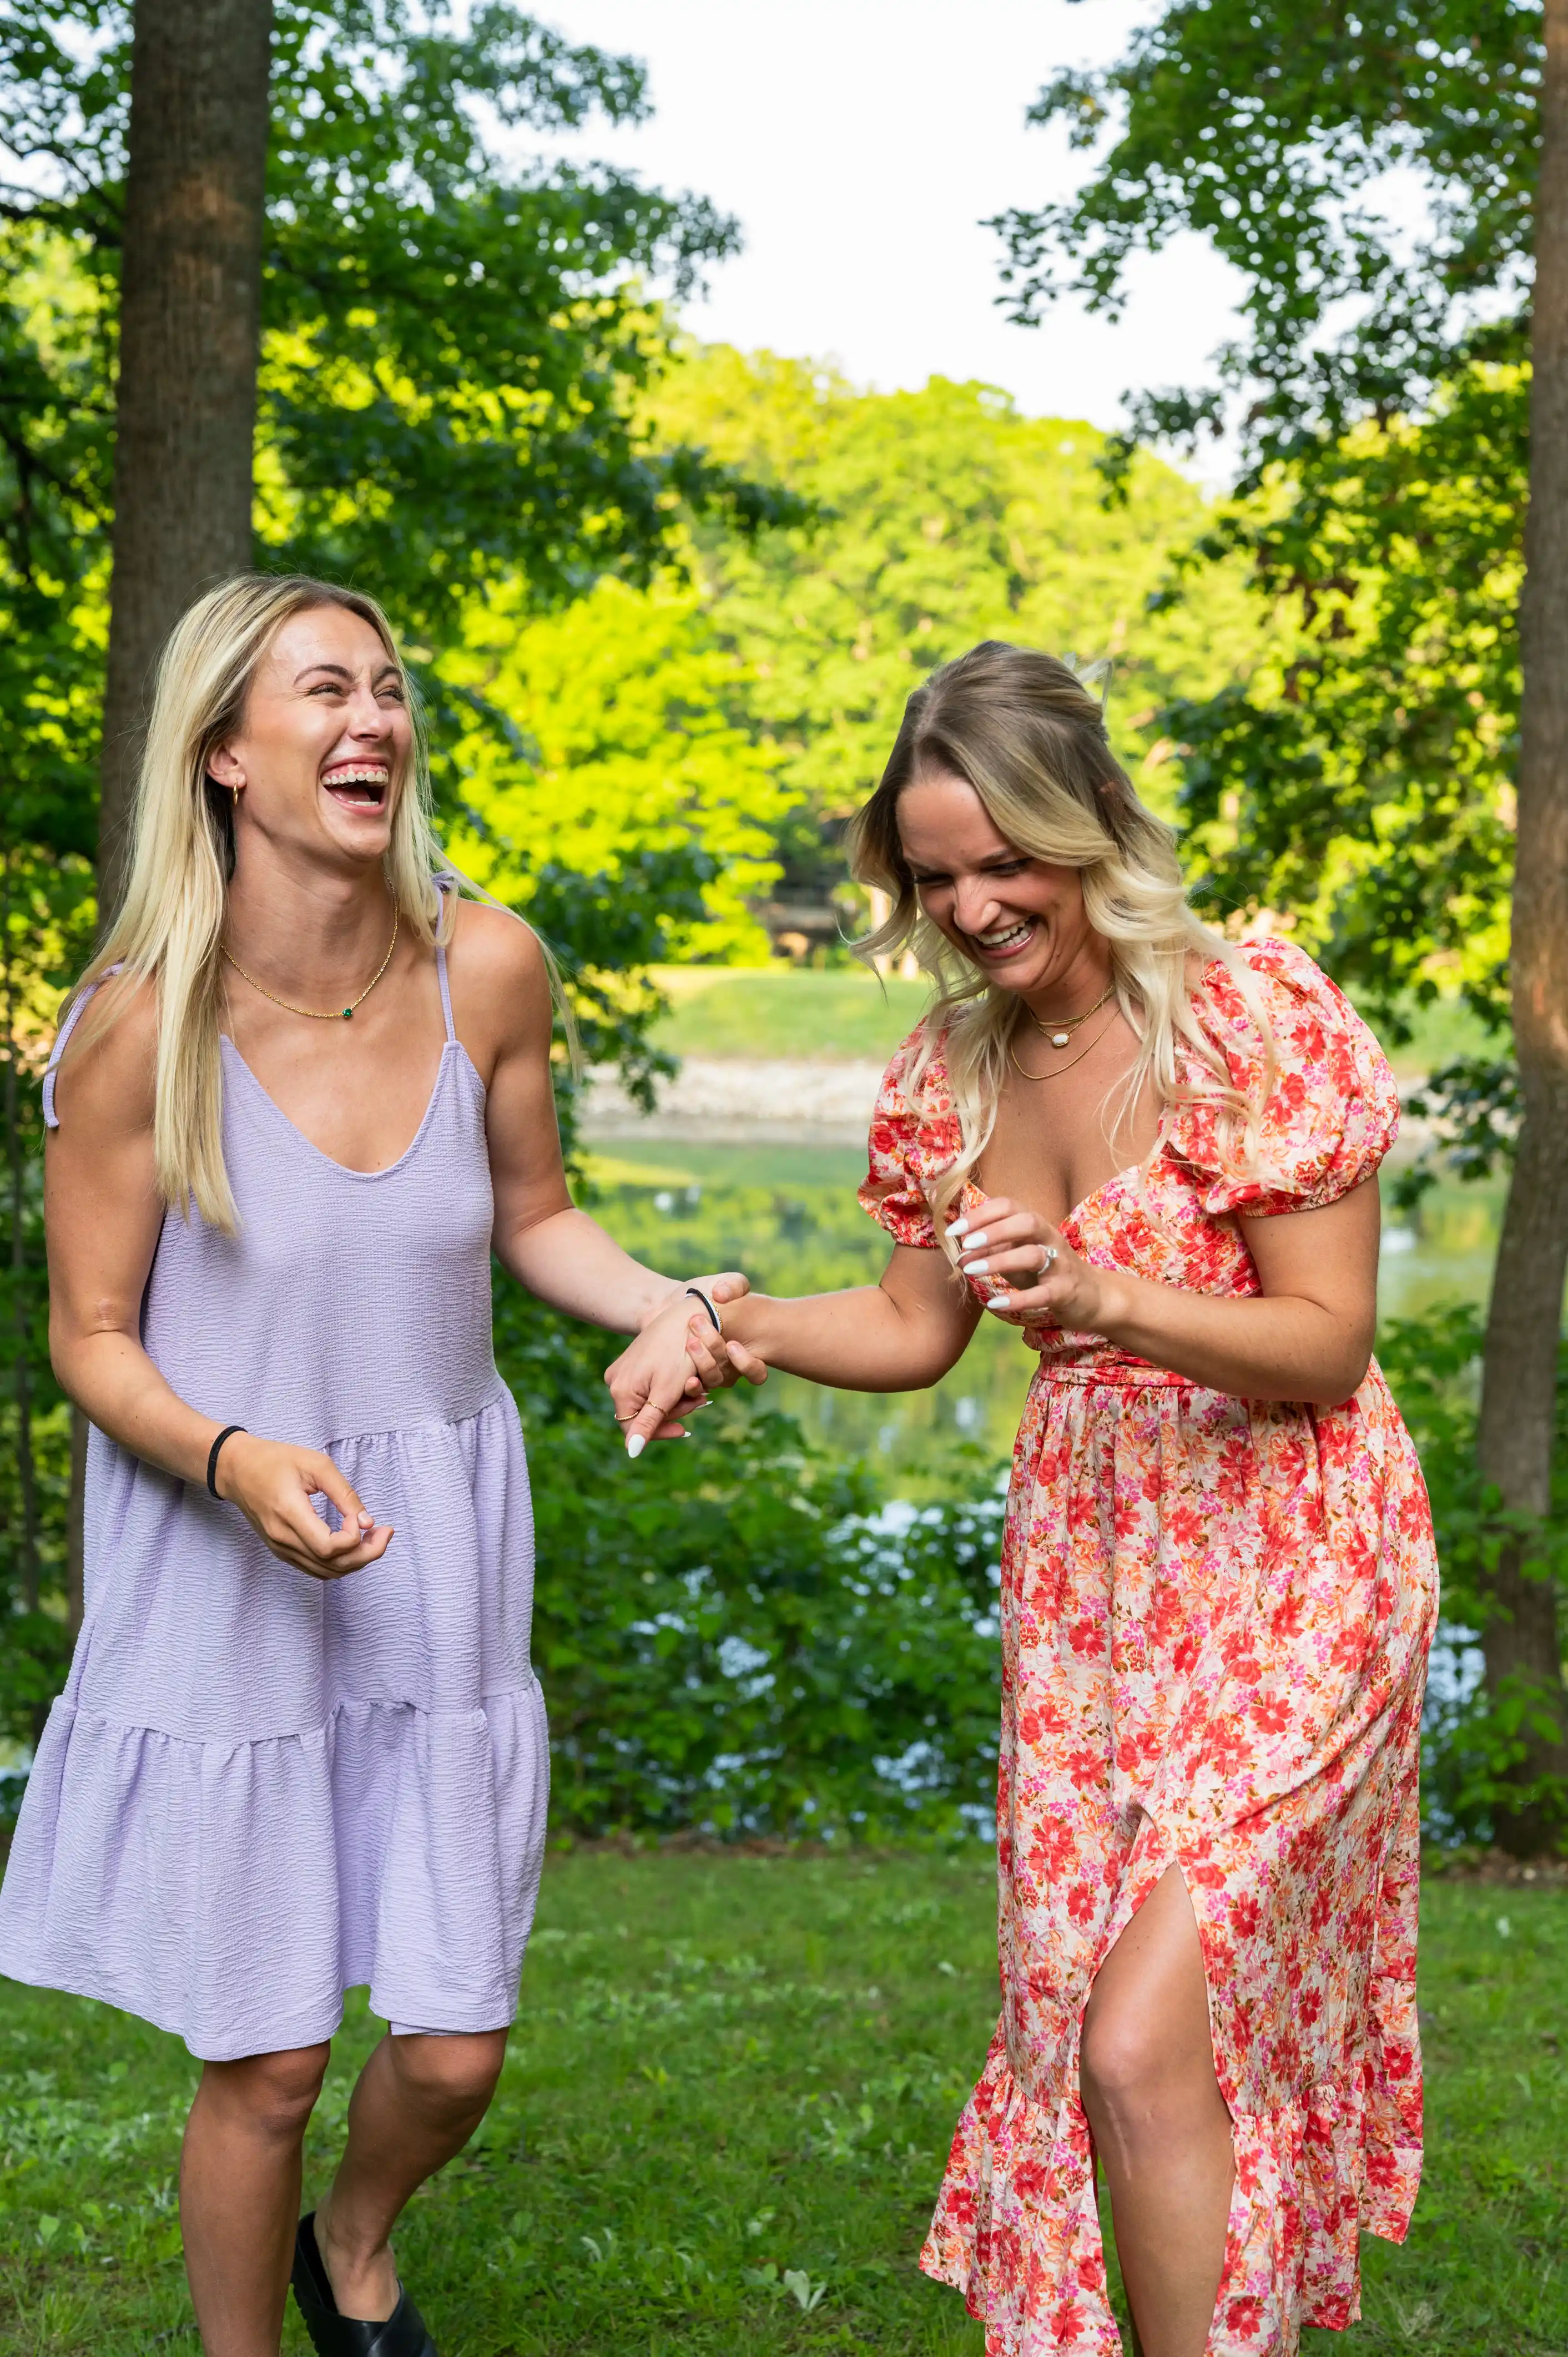 Two women laughing and walking in a park with trees in the background.